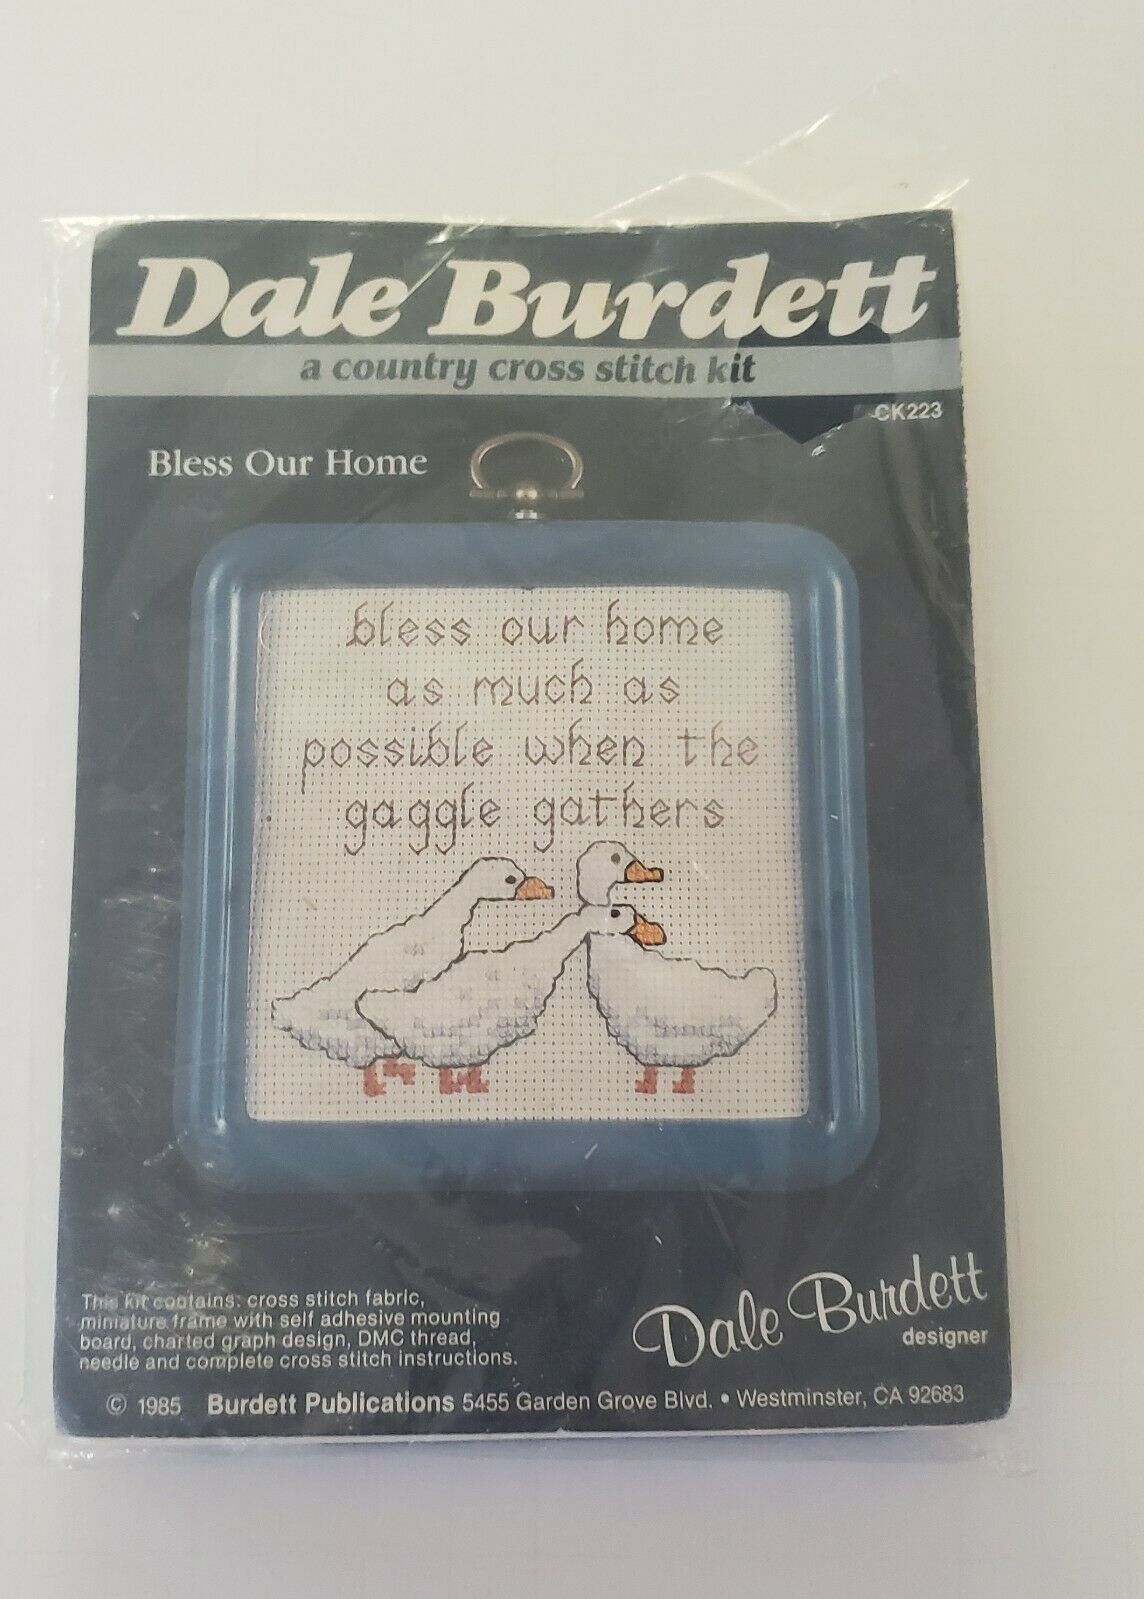 Primary image for 1985 SEALED Dale Burdett Country Cross Stitch Kit #CK223 "Bless Our Home"  geese